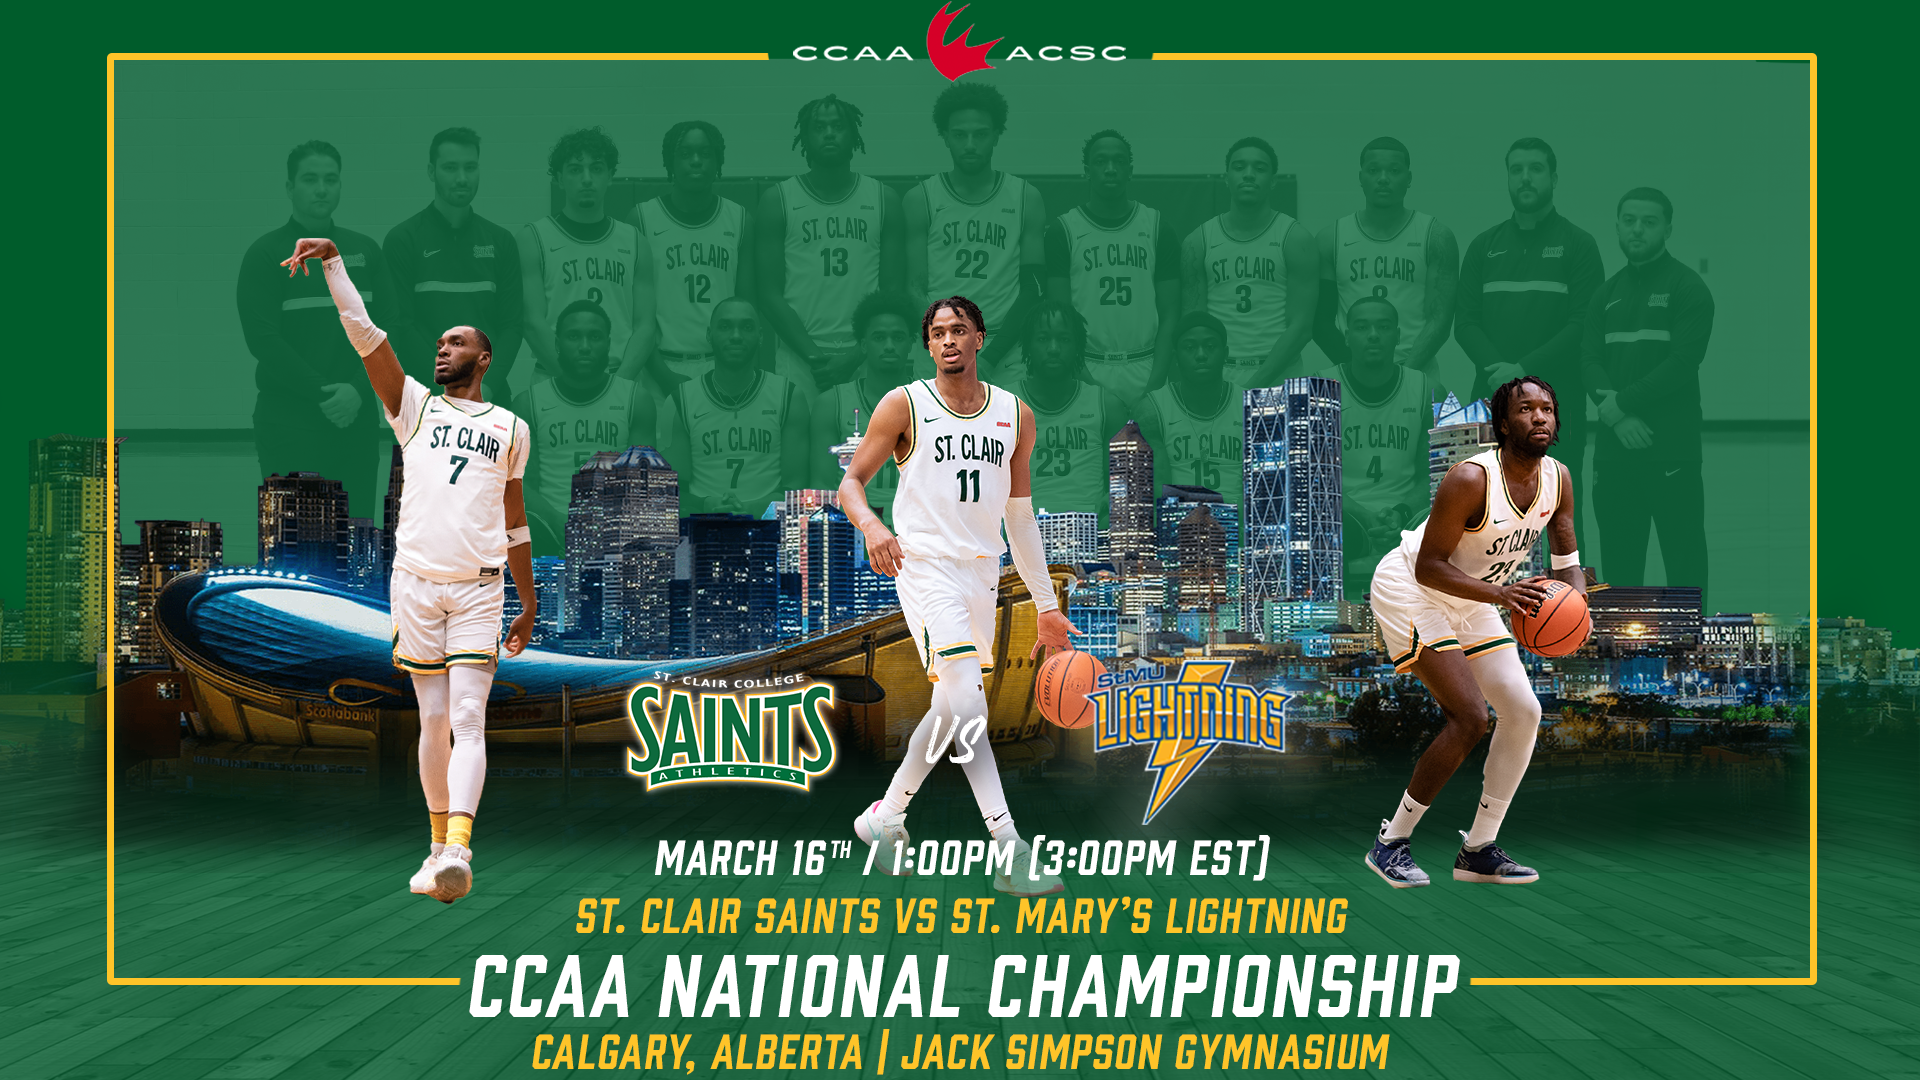 Men’s Basketball Reaching for National Title in Calgary